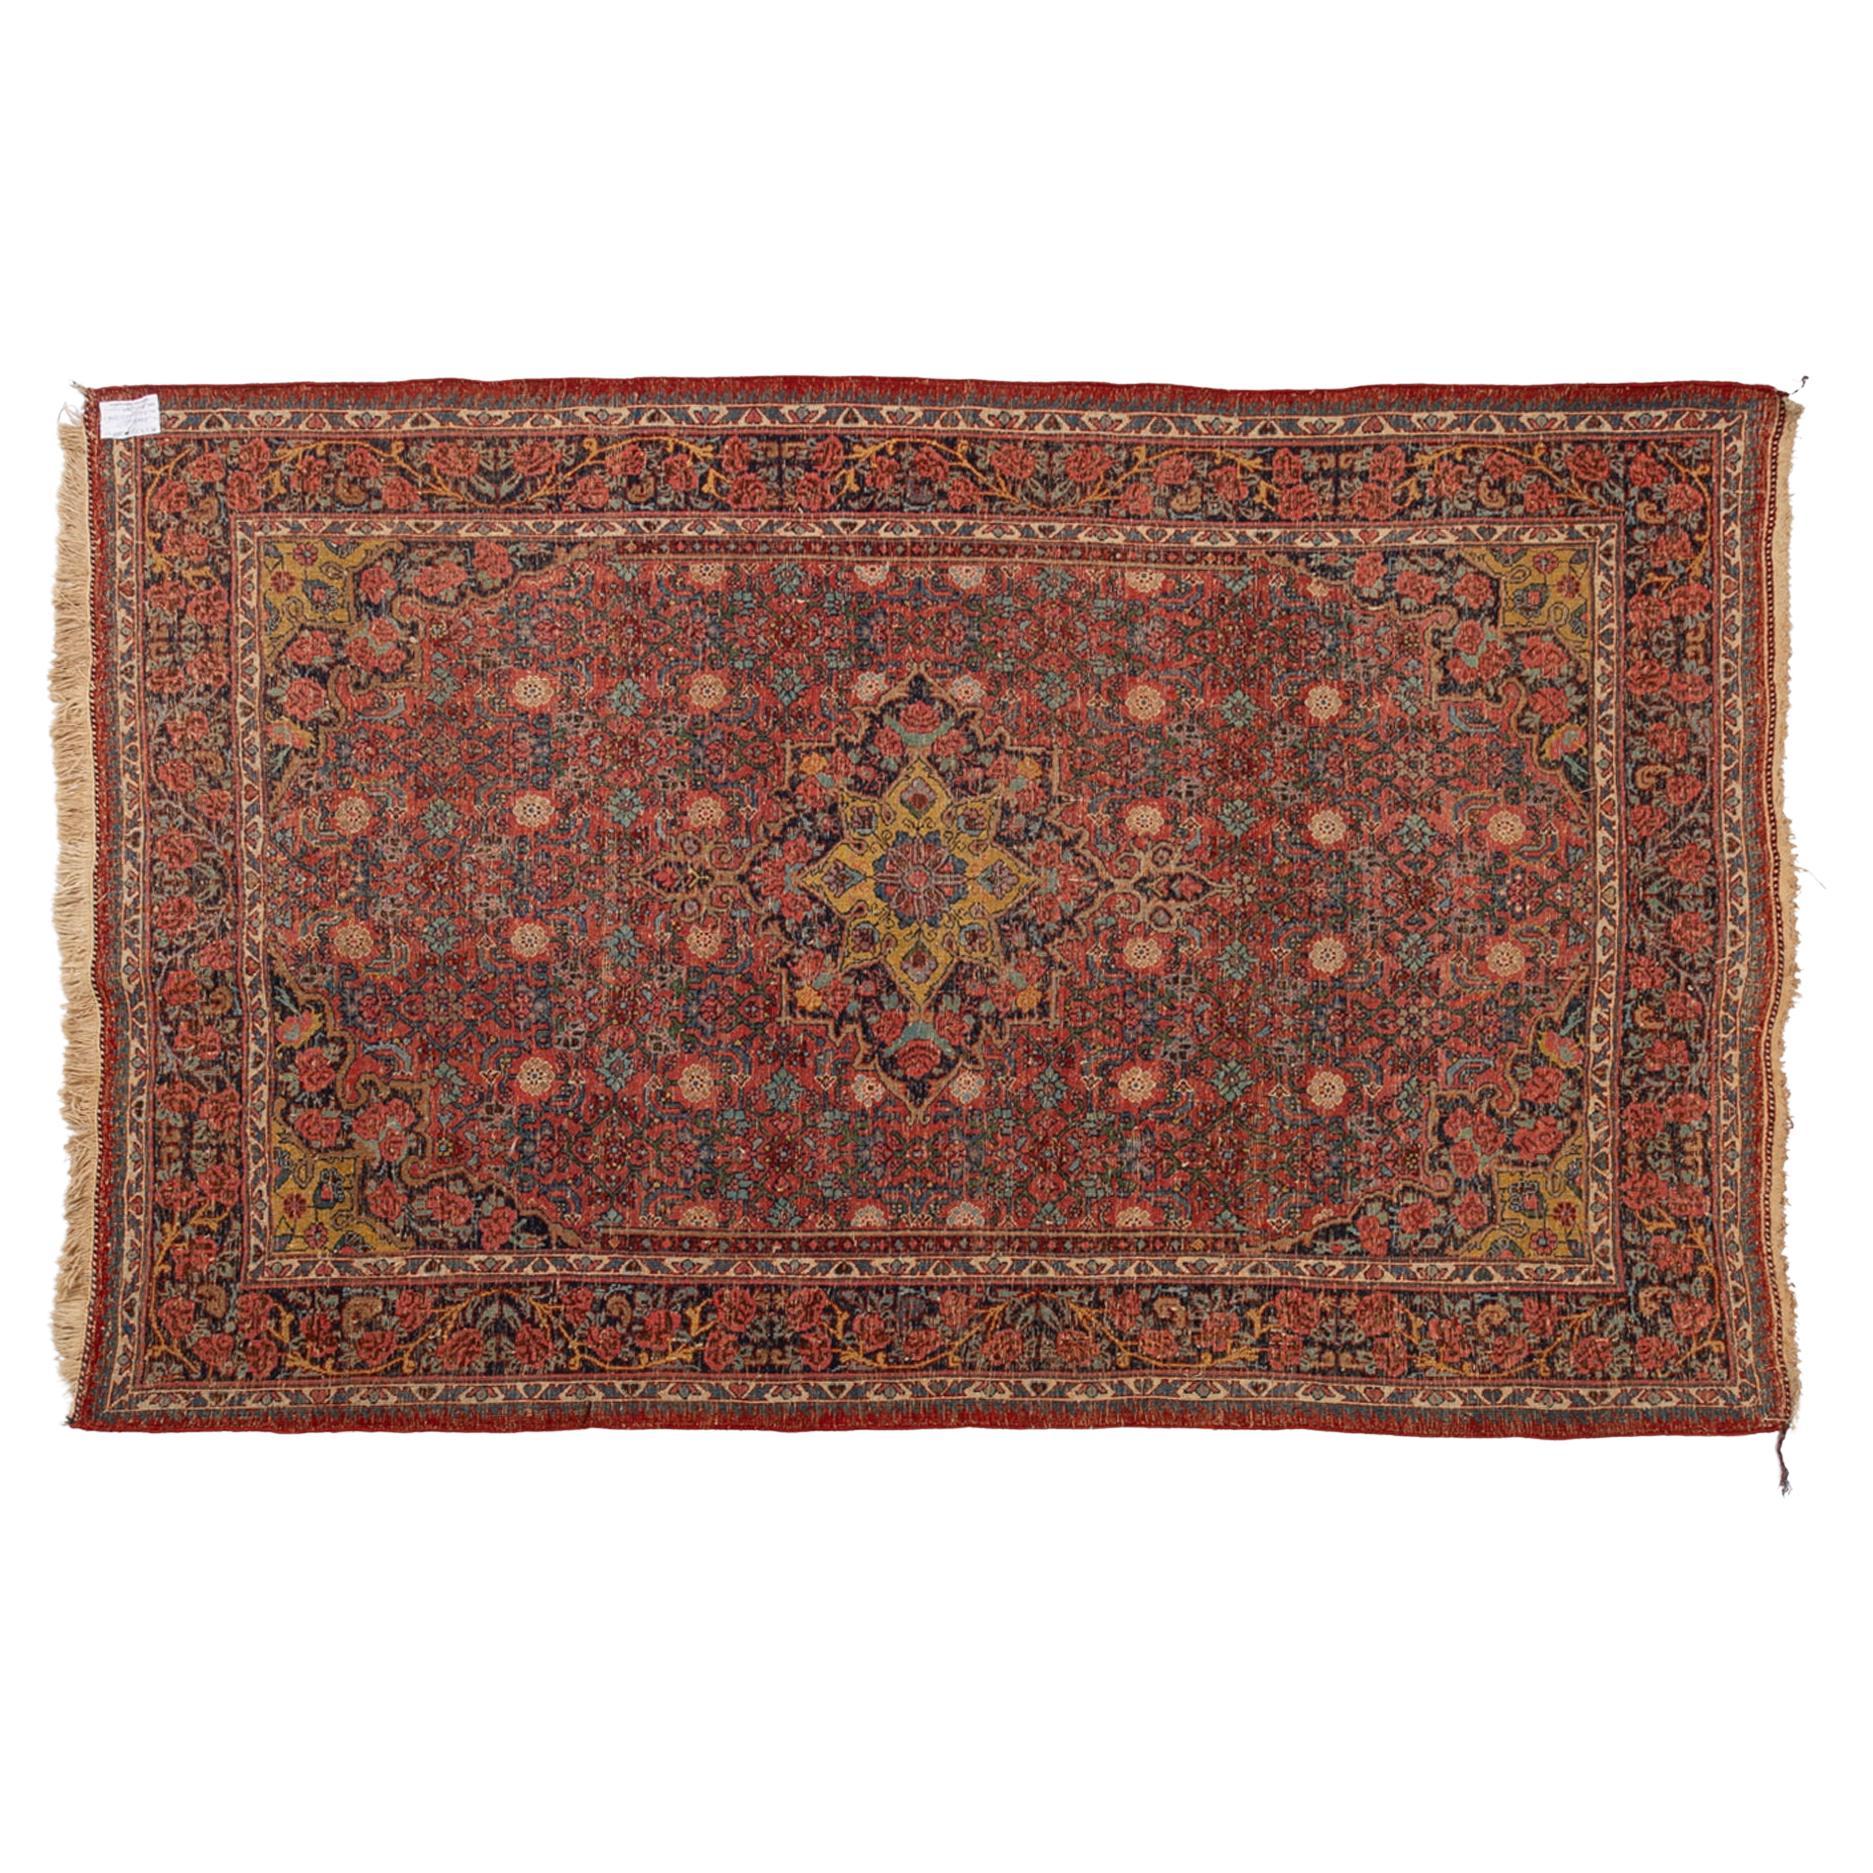 nr. 1365 - A very classical oriental carpet, it's true, but it's full of roses! I couldn't miss it!
In the winter season it cheers up with its flowers, in the summer it brings flowers from the garden into the house. And it is also very robust and of